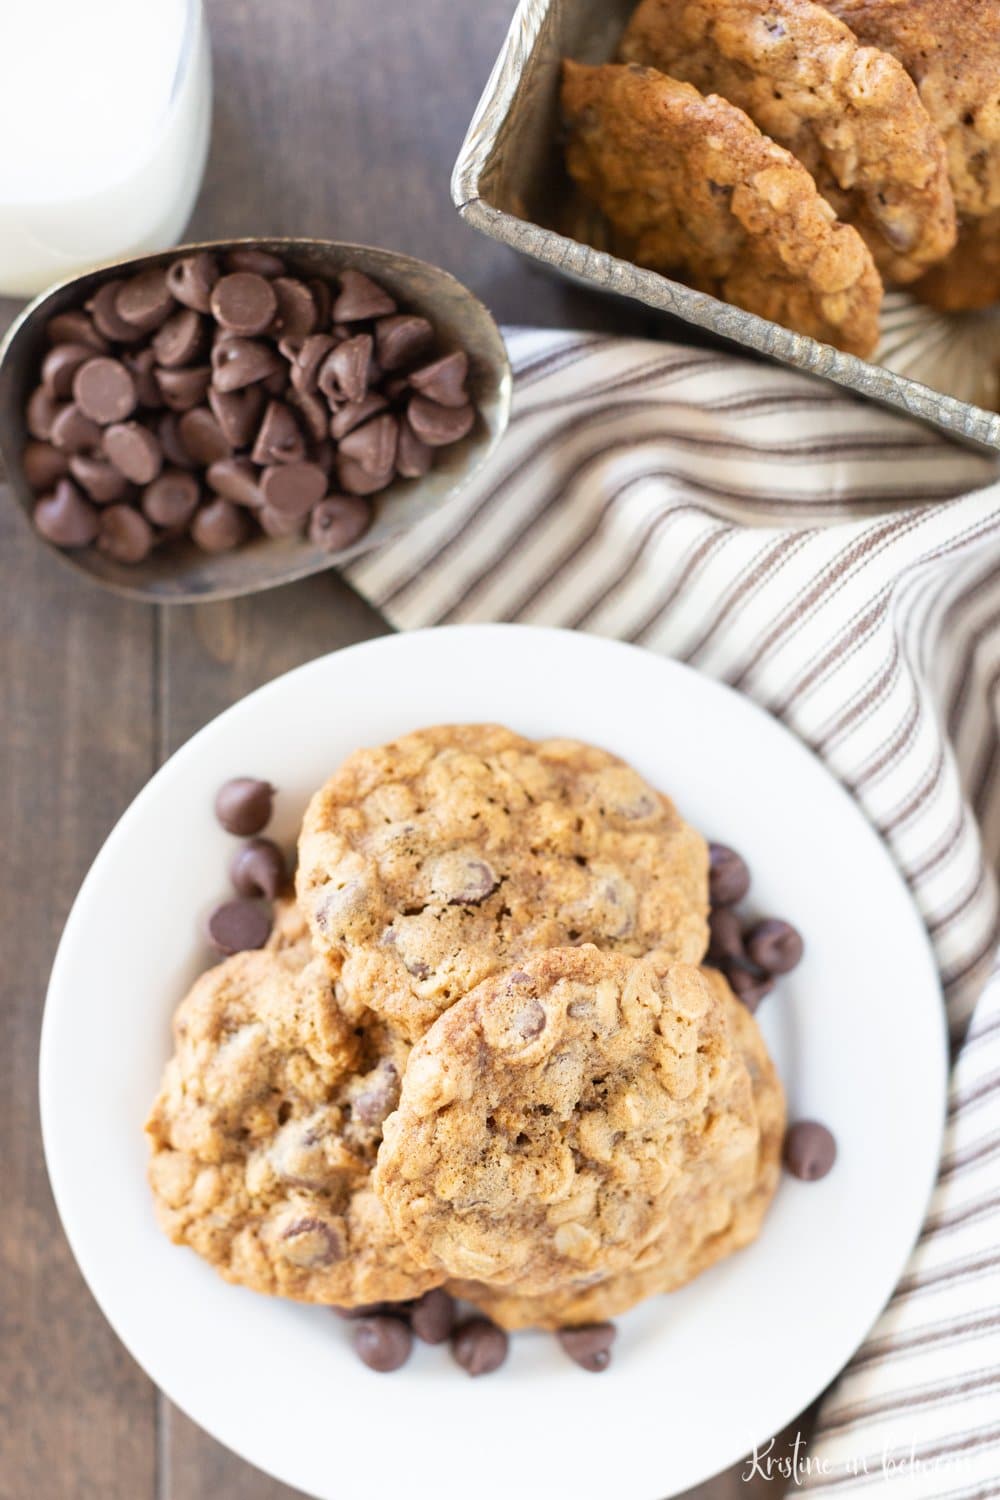 These are the perfect chewy oatmeal chocolate chip cookies!